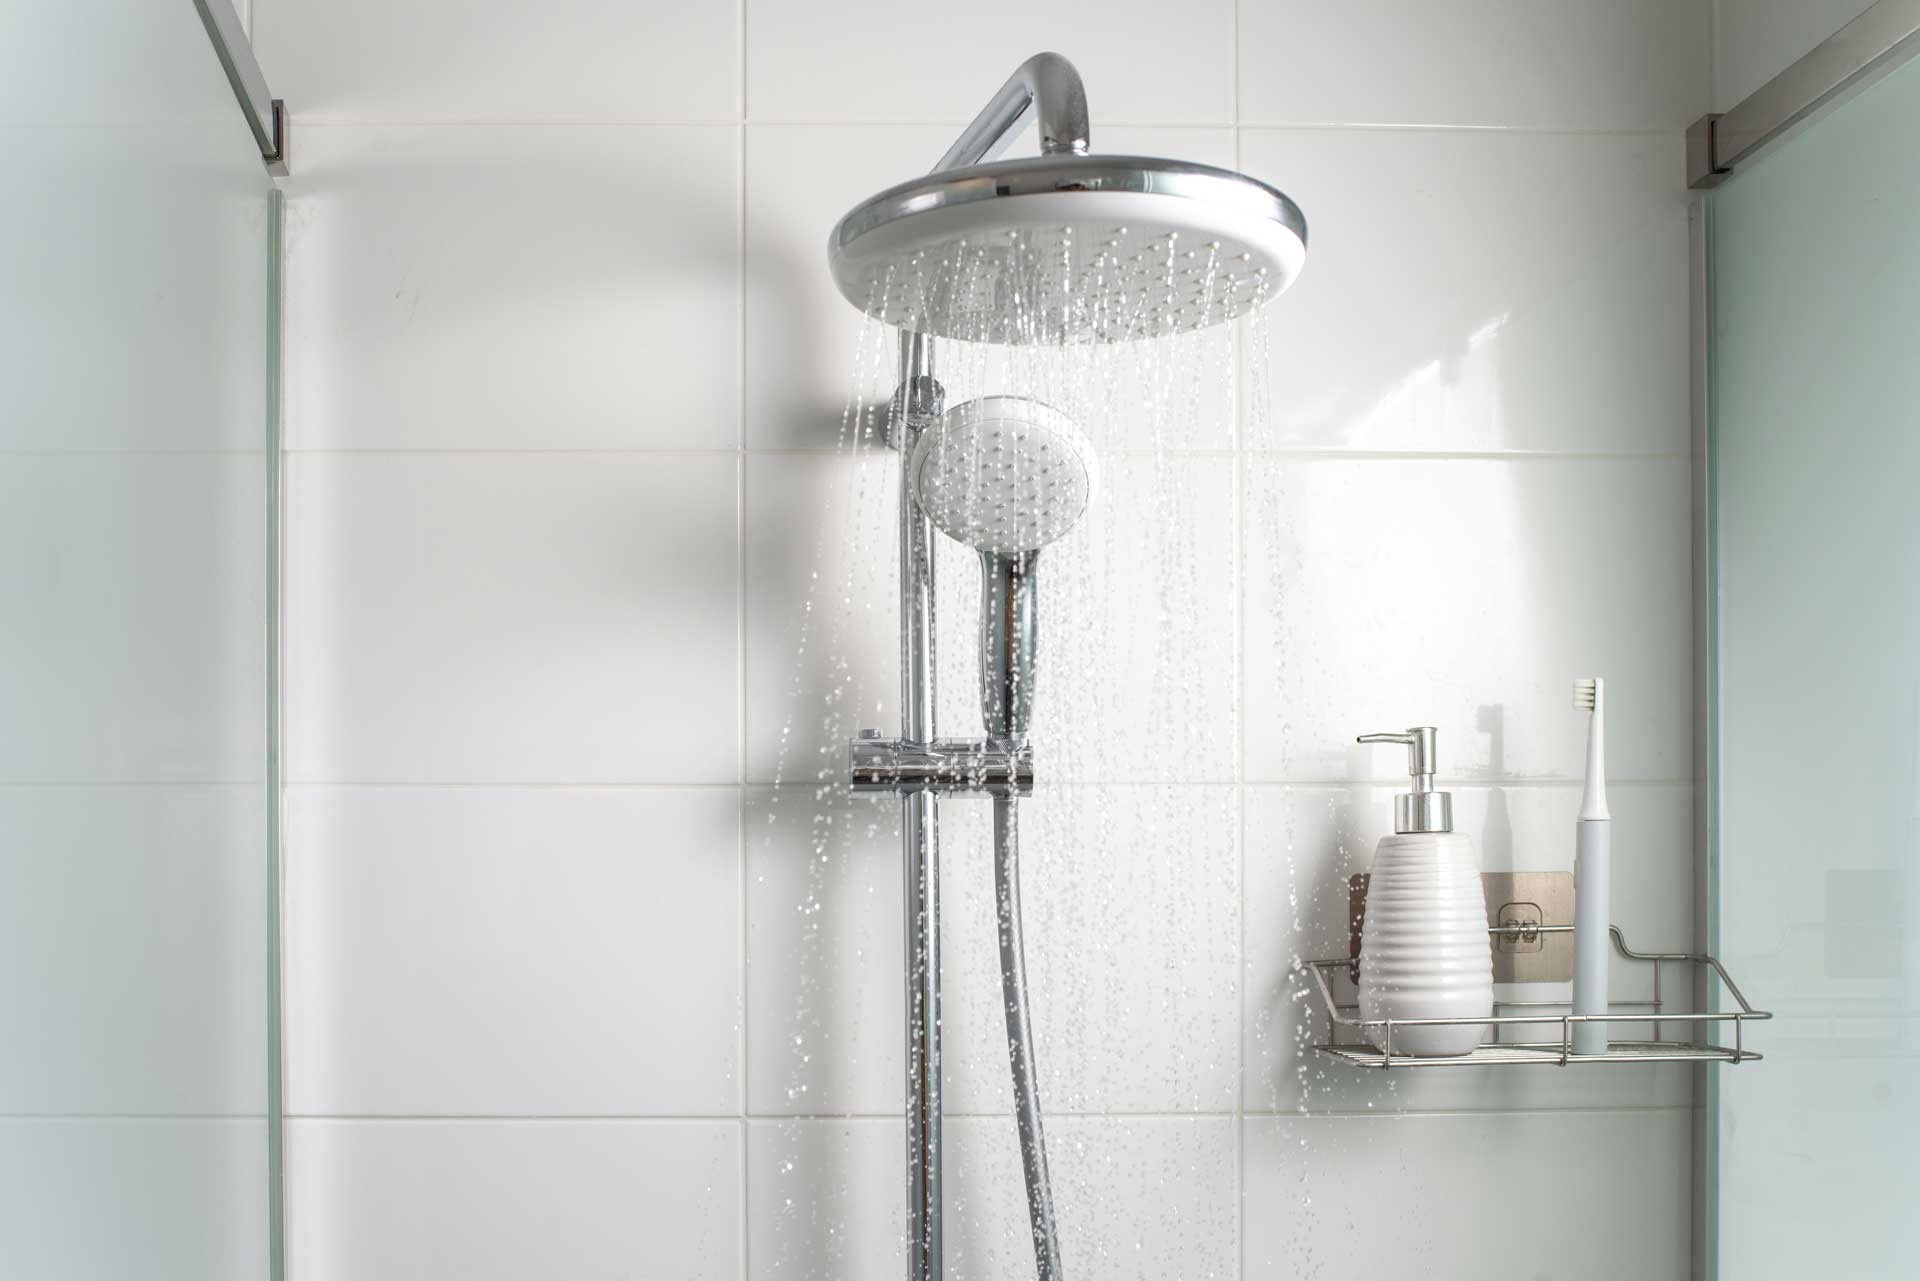 How To Fix a Leaky Showerhead